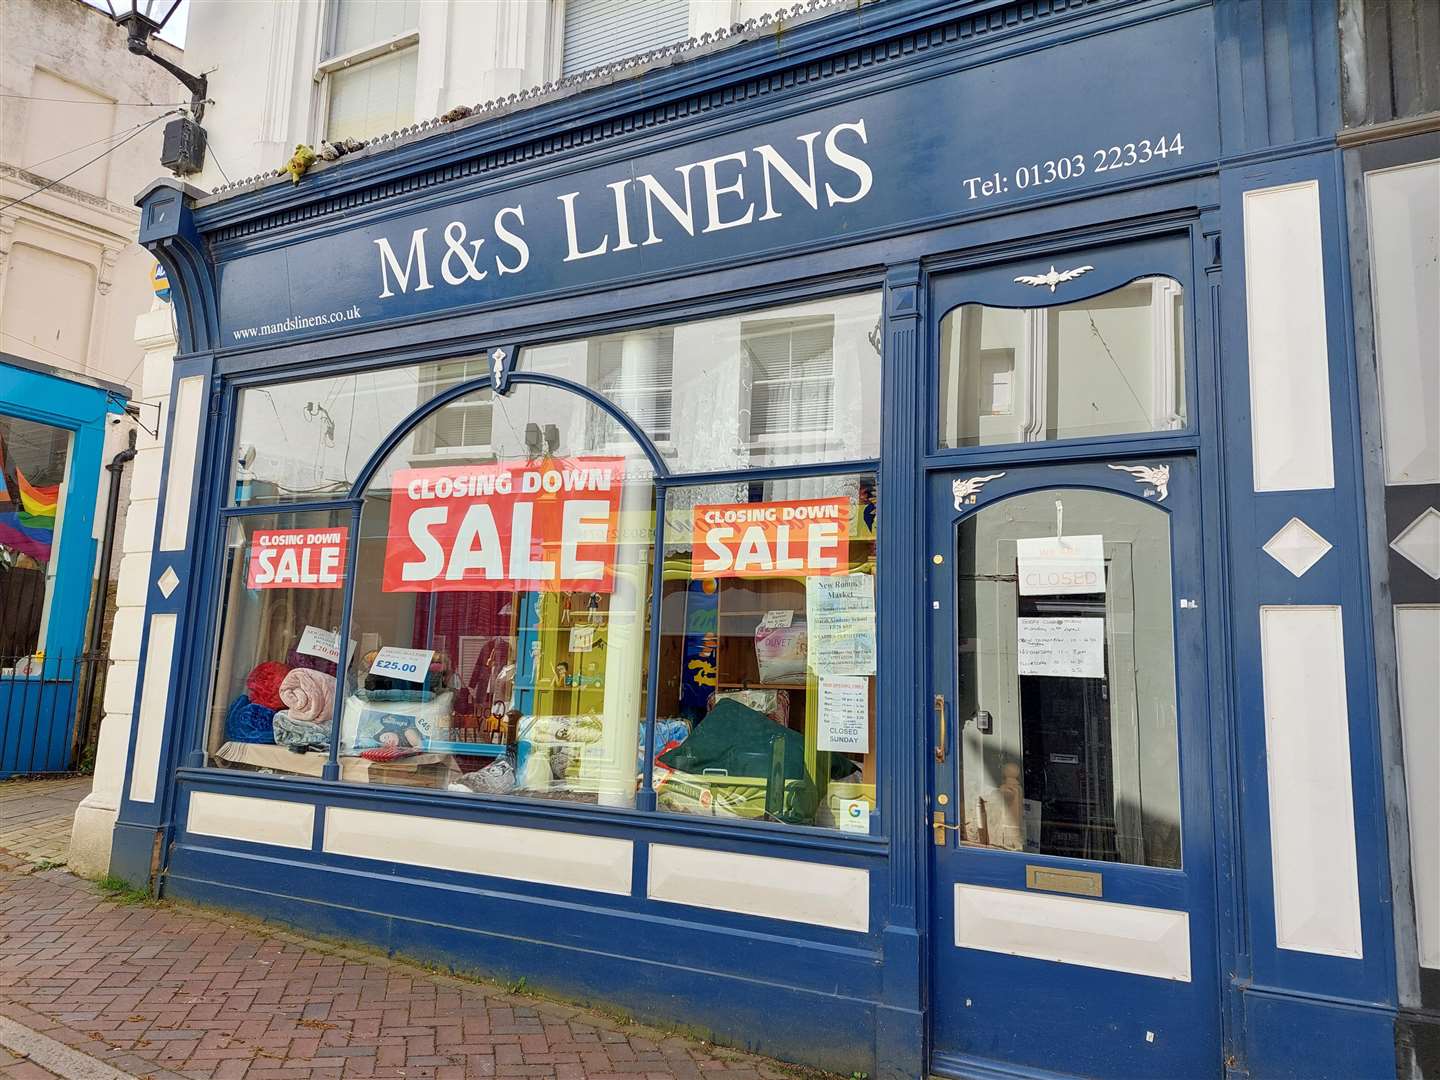 M&S Linens in Church Street, Folkestone is also closing